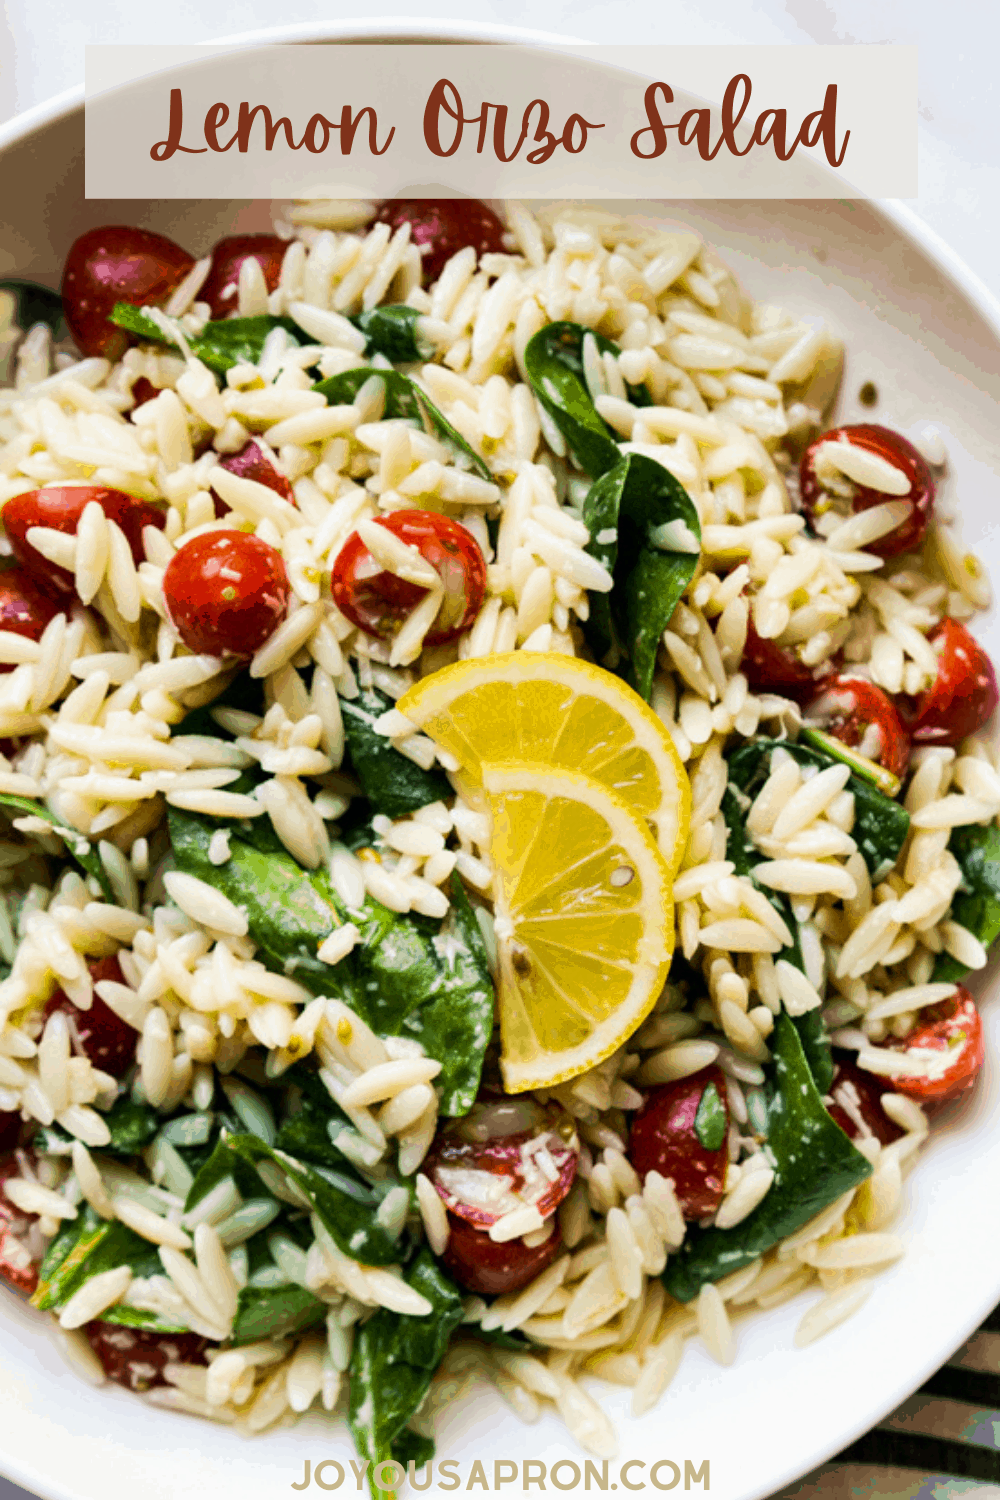 Lemon Orzo Salad - healthy and easy side dish recipe! Chewy orzo pasta combined with spinach and cherry tomatoes, tossed in a garlic lemon juice dressing, sprinkled with parmesan cheese. via @joyousapron